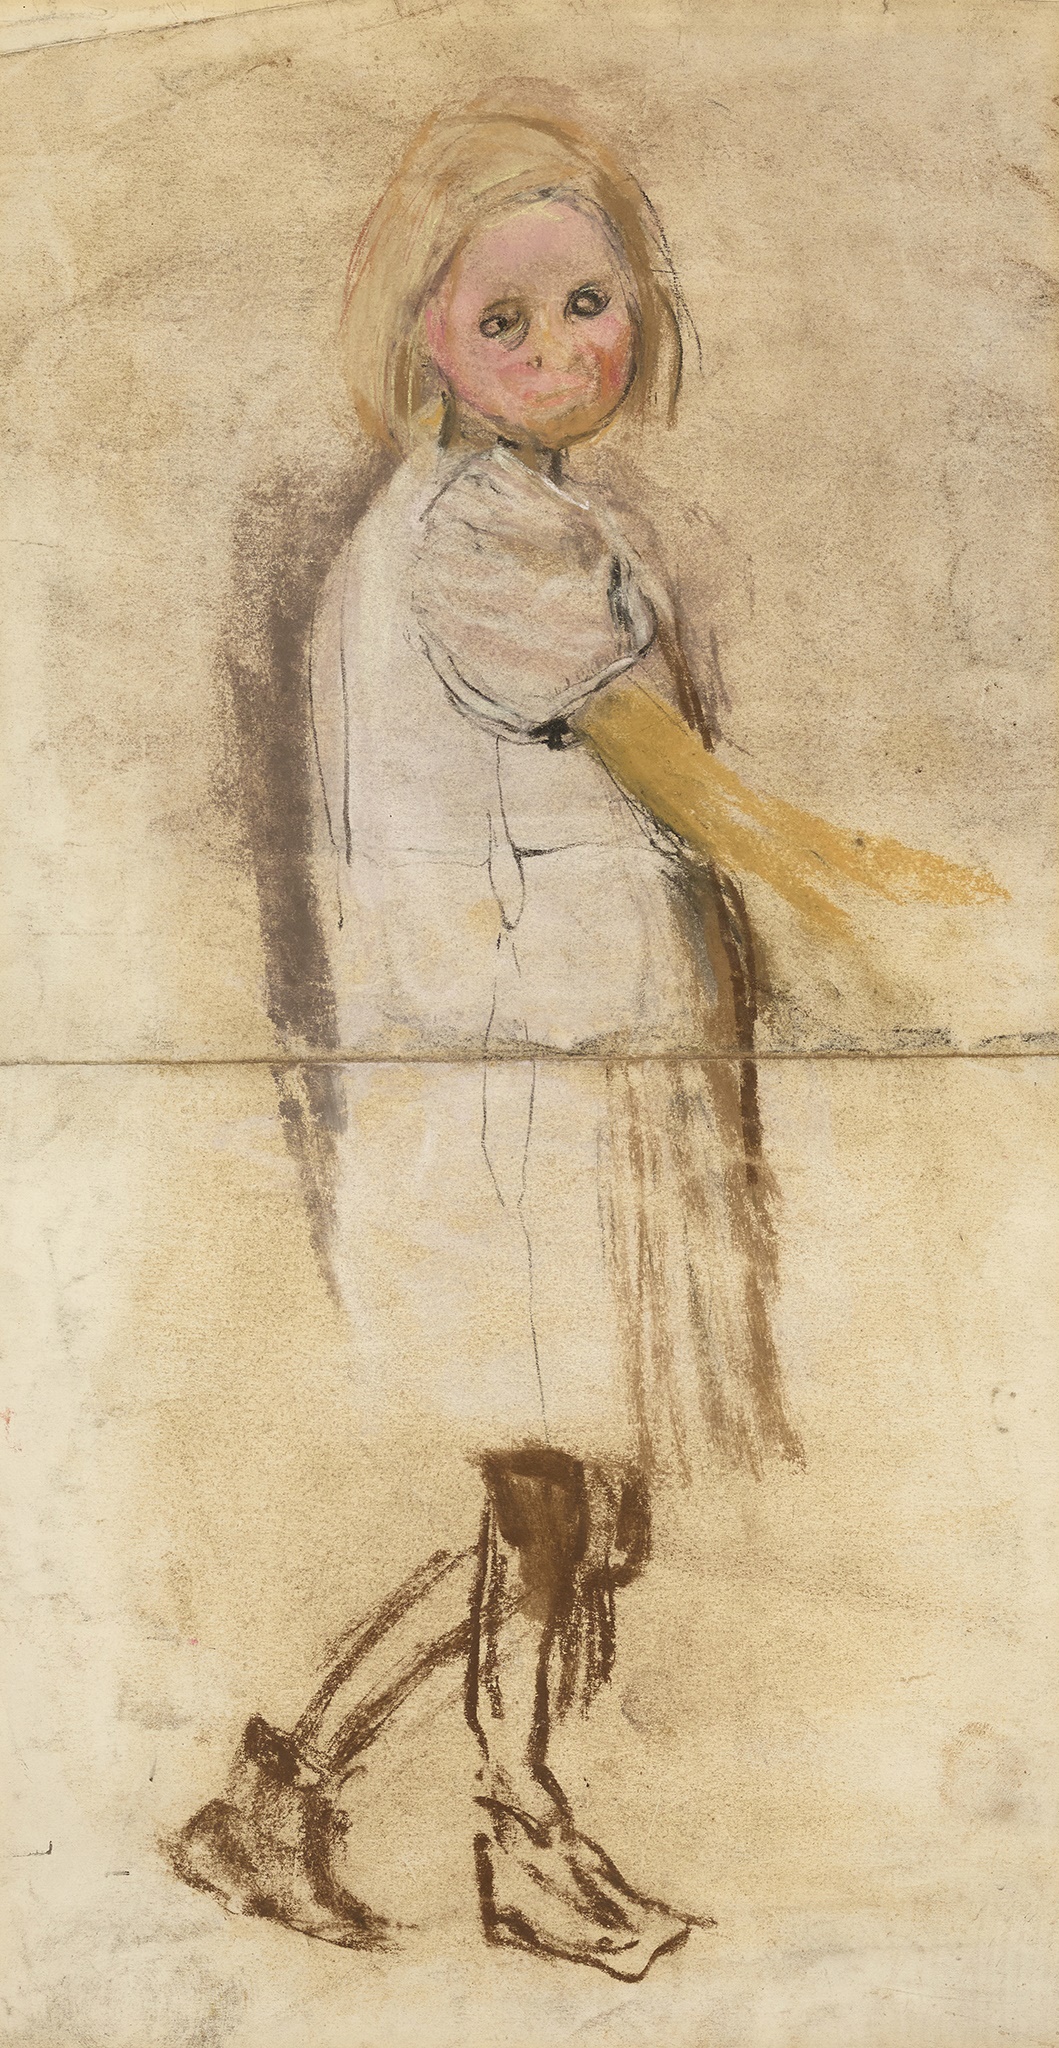 LOT 146 | JOAN EARDLEY R.S.A. (SCOTTISH 1921-1963) | STUDY OF A YOUNG GIRL Pastel on conjoined sheets of paper | 46cm x 25.5cm (18in x 10in) | £6,000 - £8,000 + fees